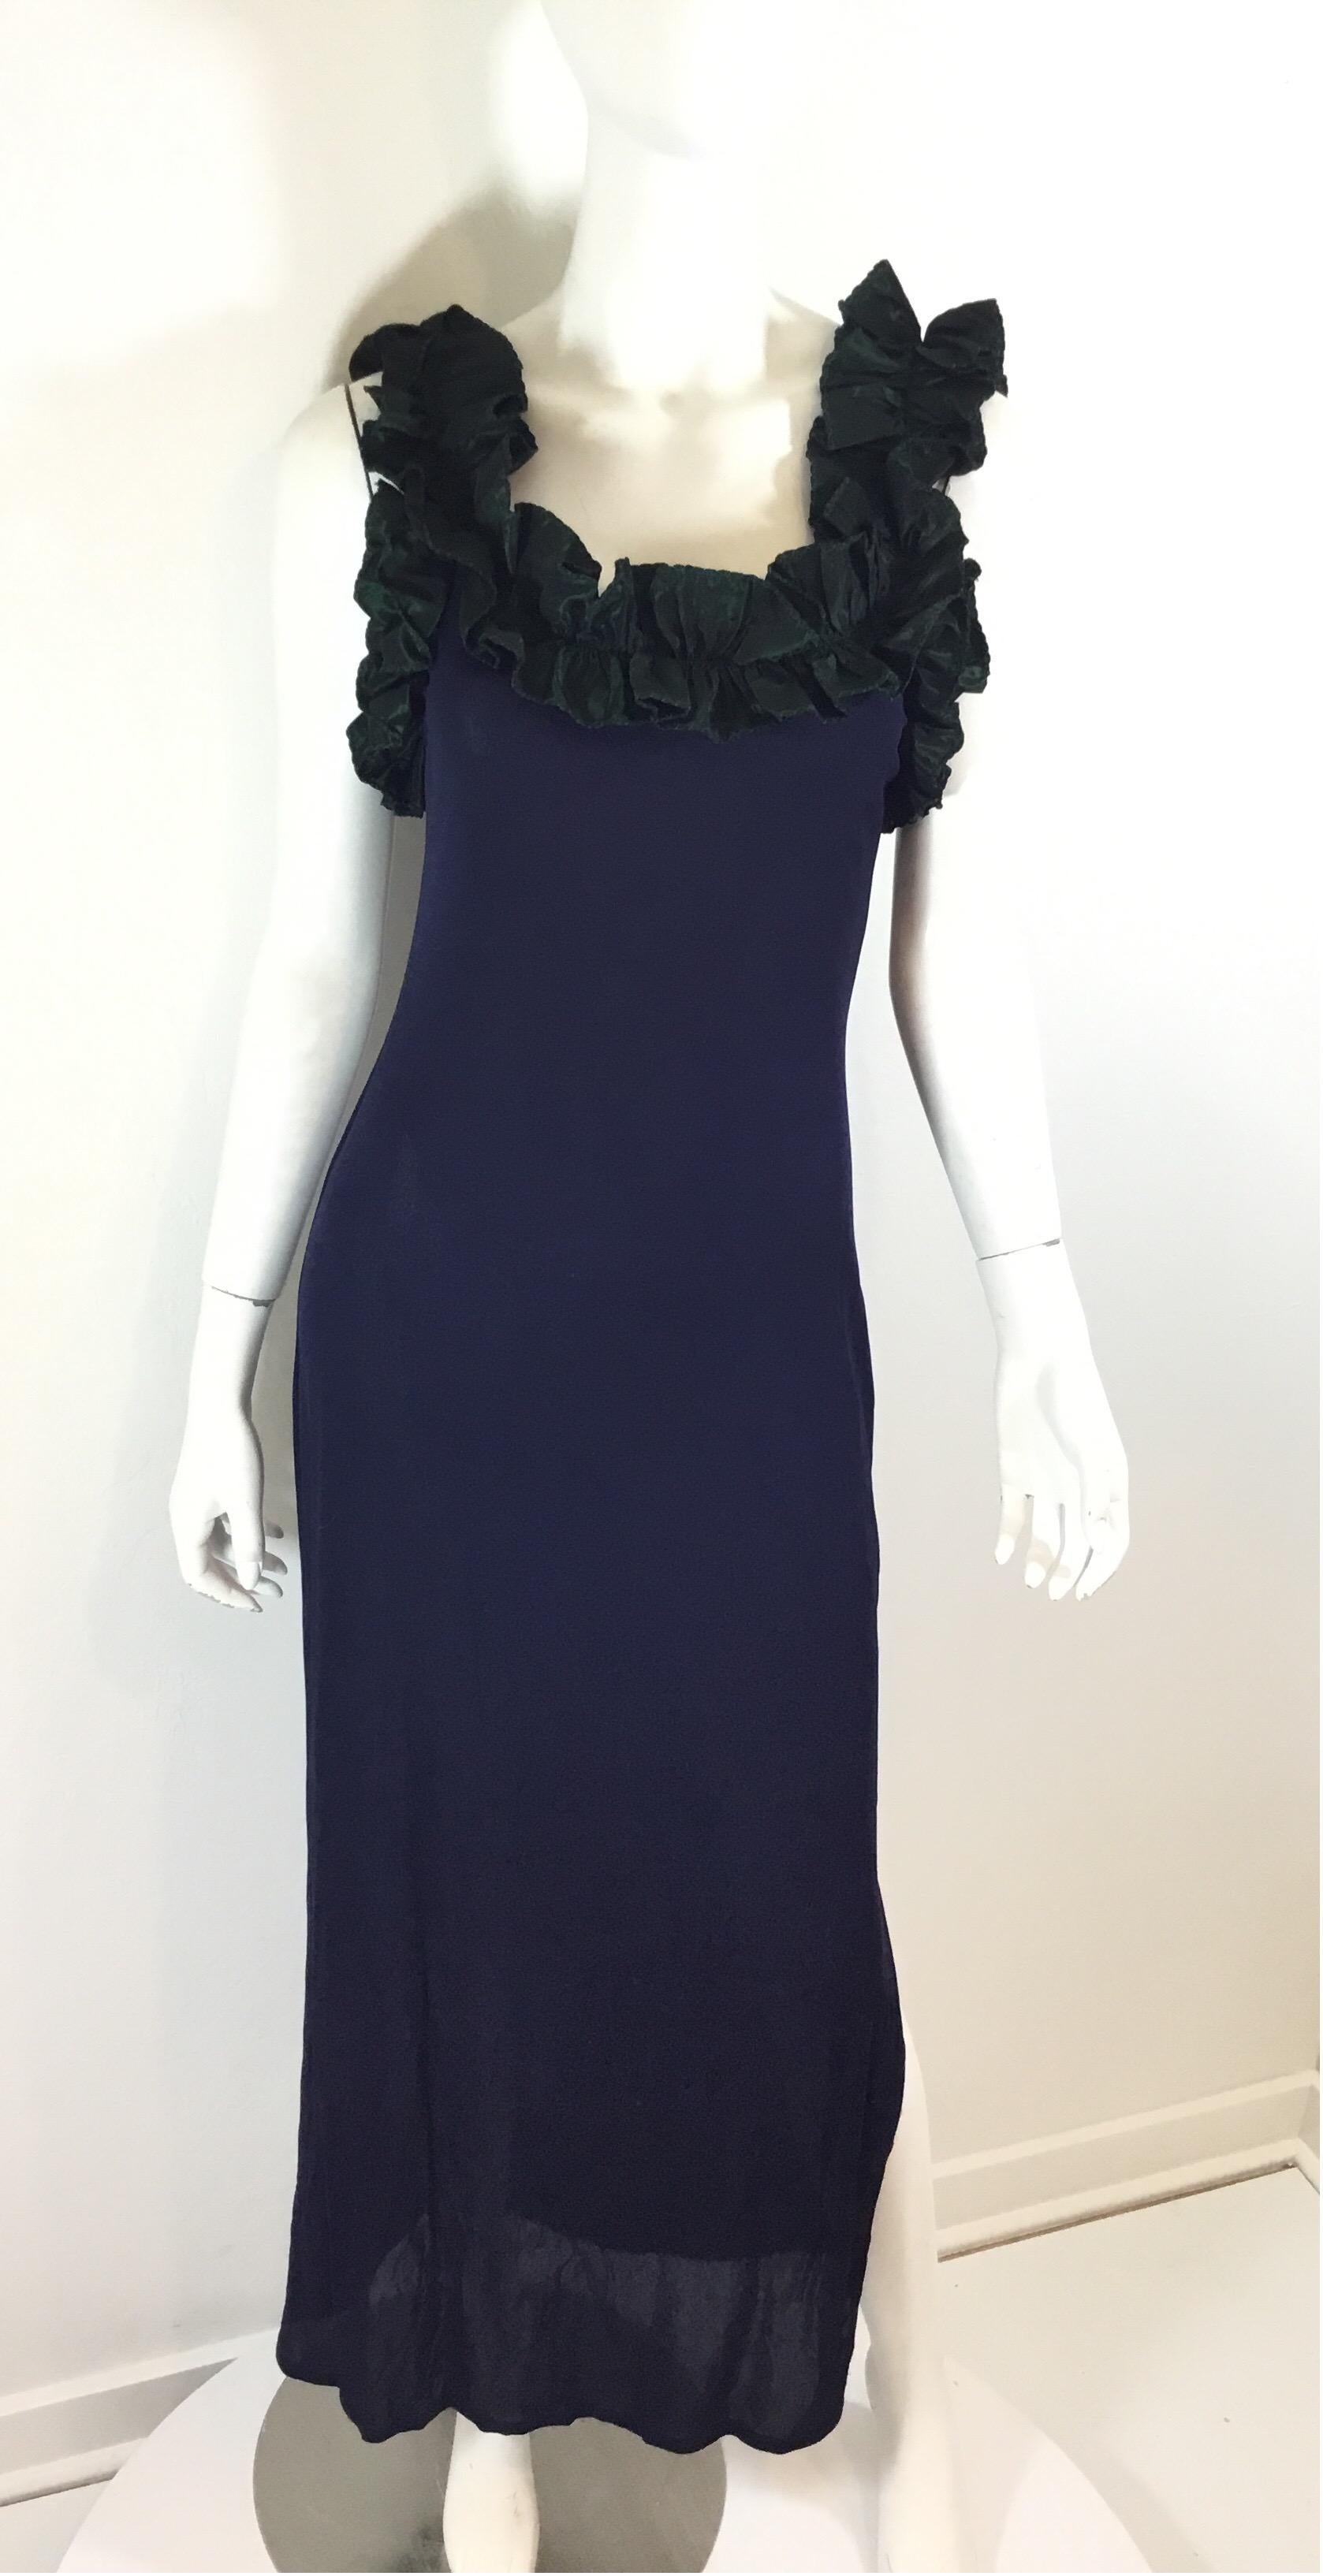 Zandra Rhodes Navy Blue Jersey Dress features a green taffeta ruffled trim along the neckline and a slit along the left leg. Dress is in great vintage condition with normal wears. Labeled Size medium, handmade in England. 

Measurements: bust 30”,